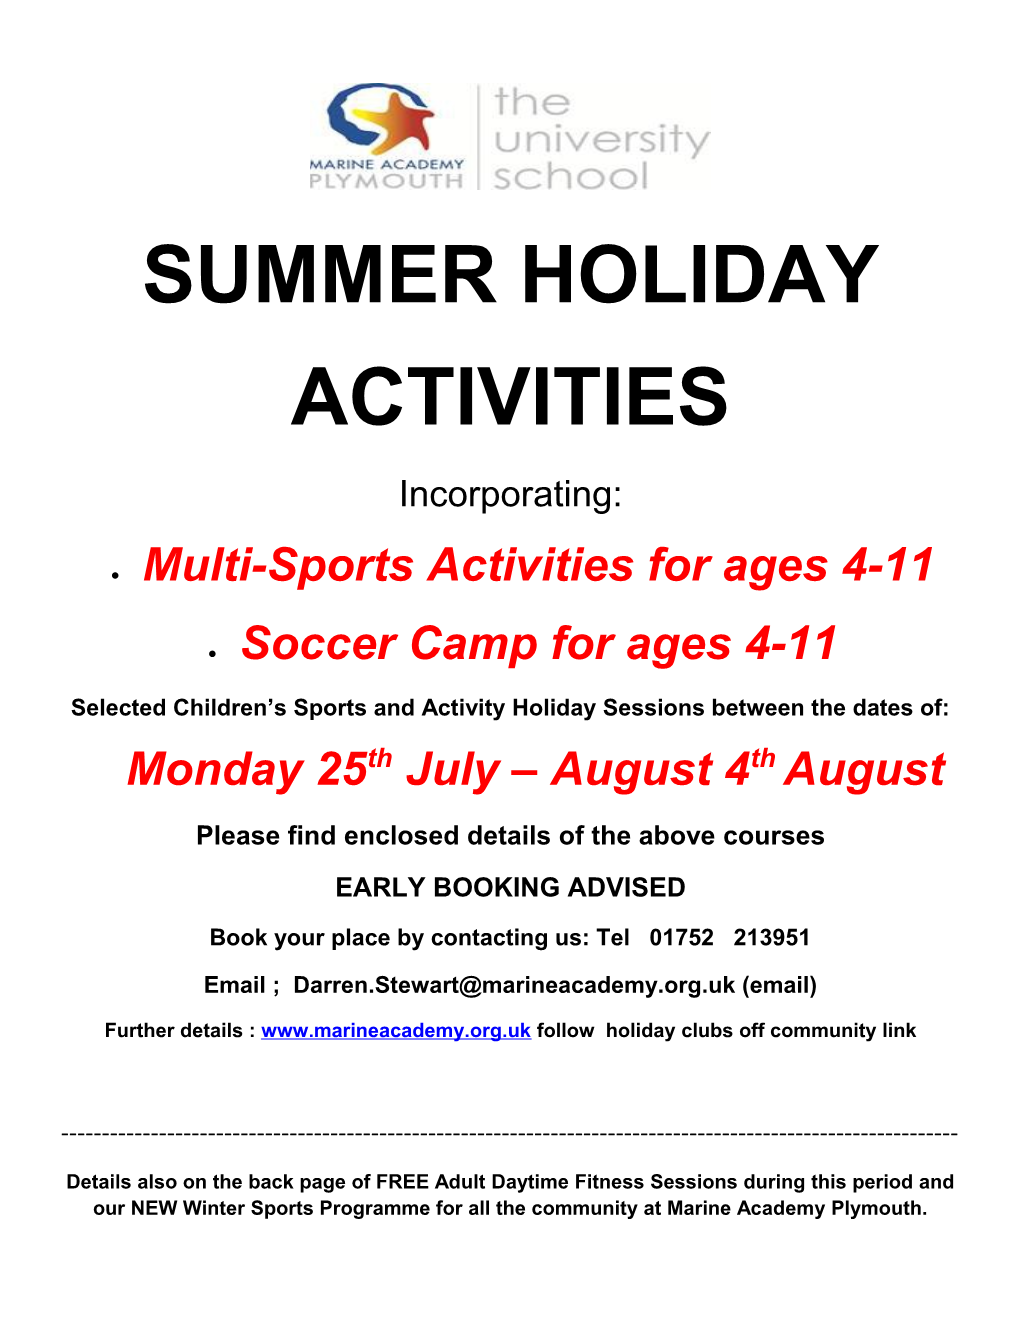 Selected Children S Sports and Activity Holiday Sessions Between the Dates Of